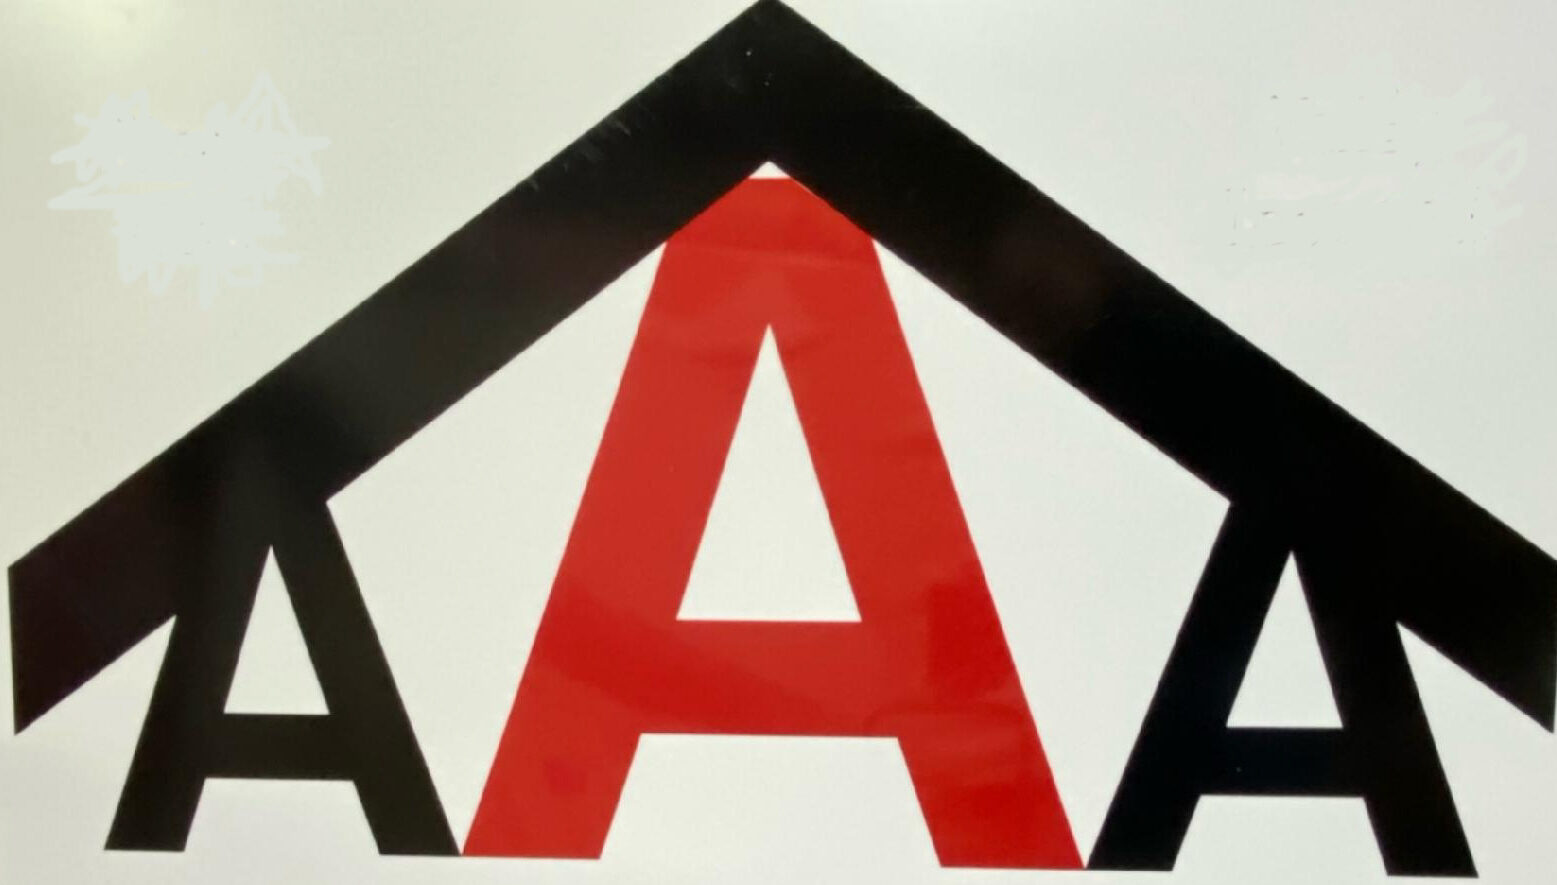 Image of a black line indicating a roof over a small black A, a large red A and another small black A